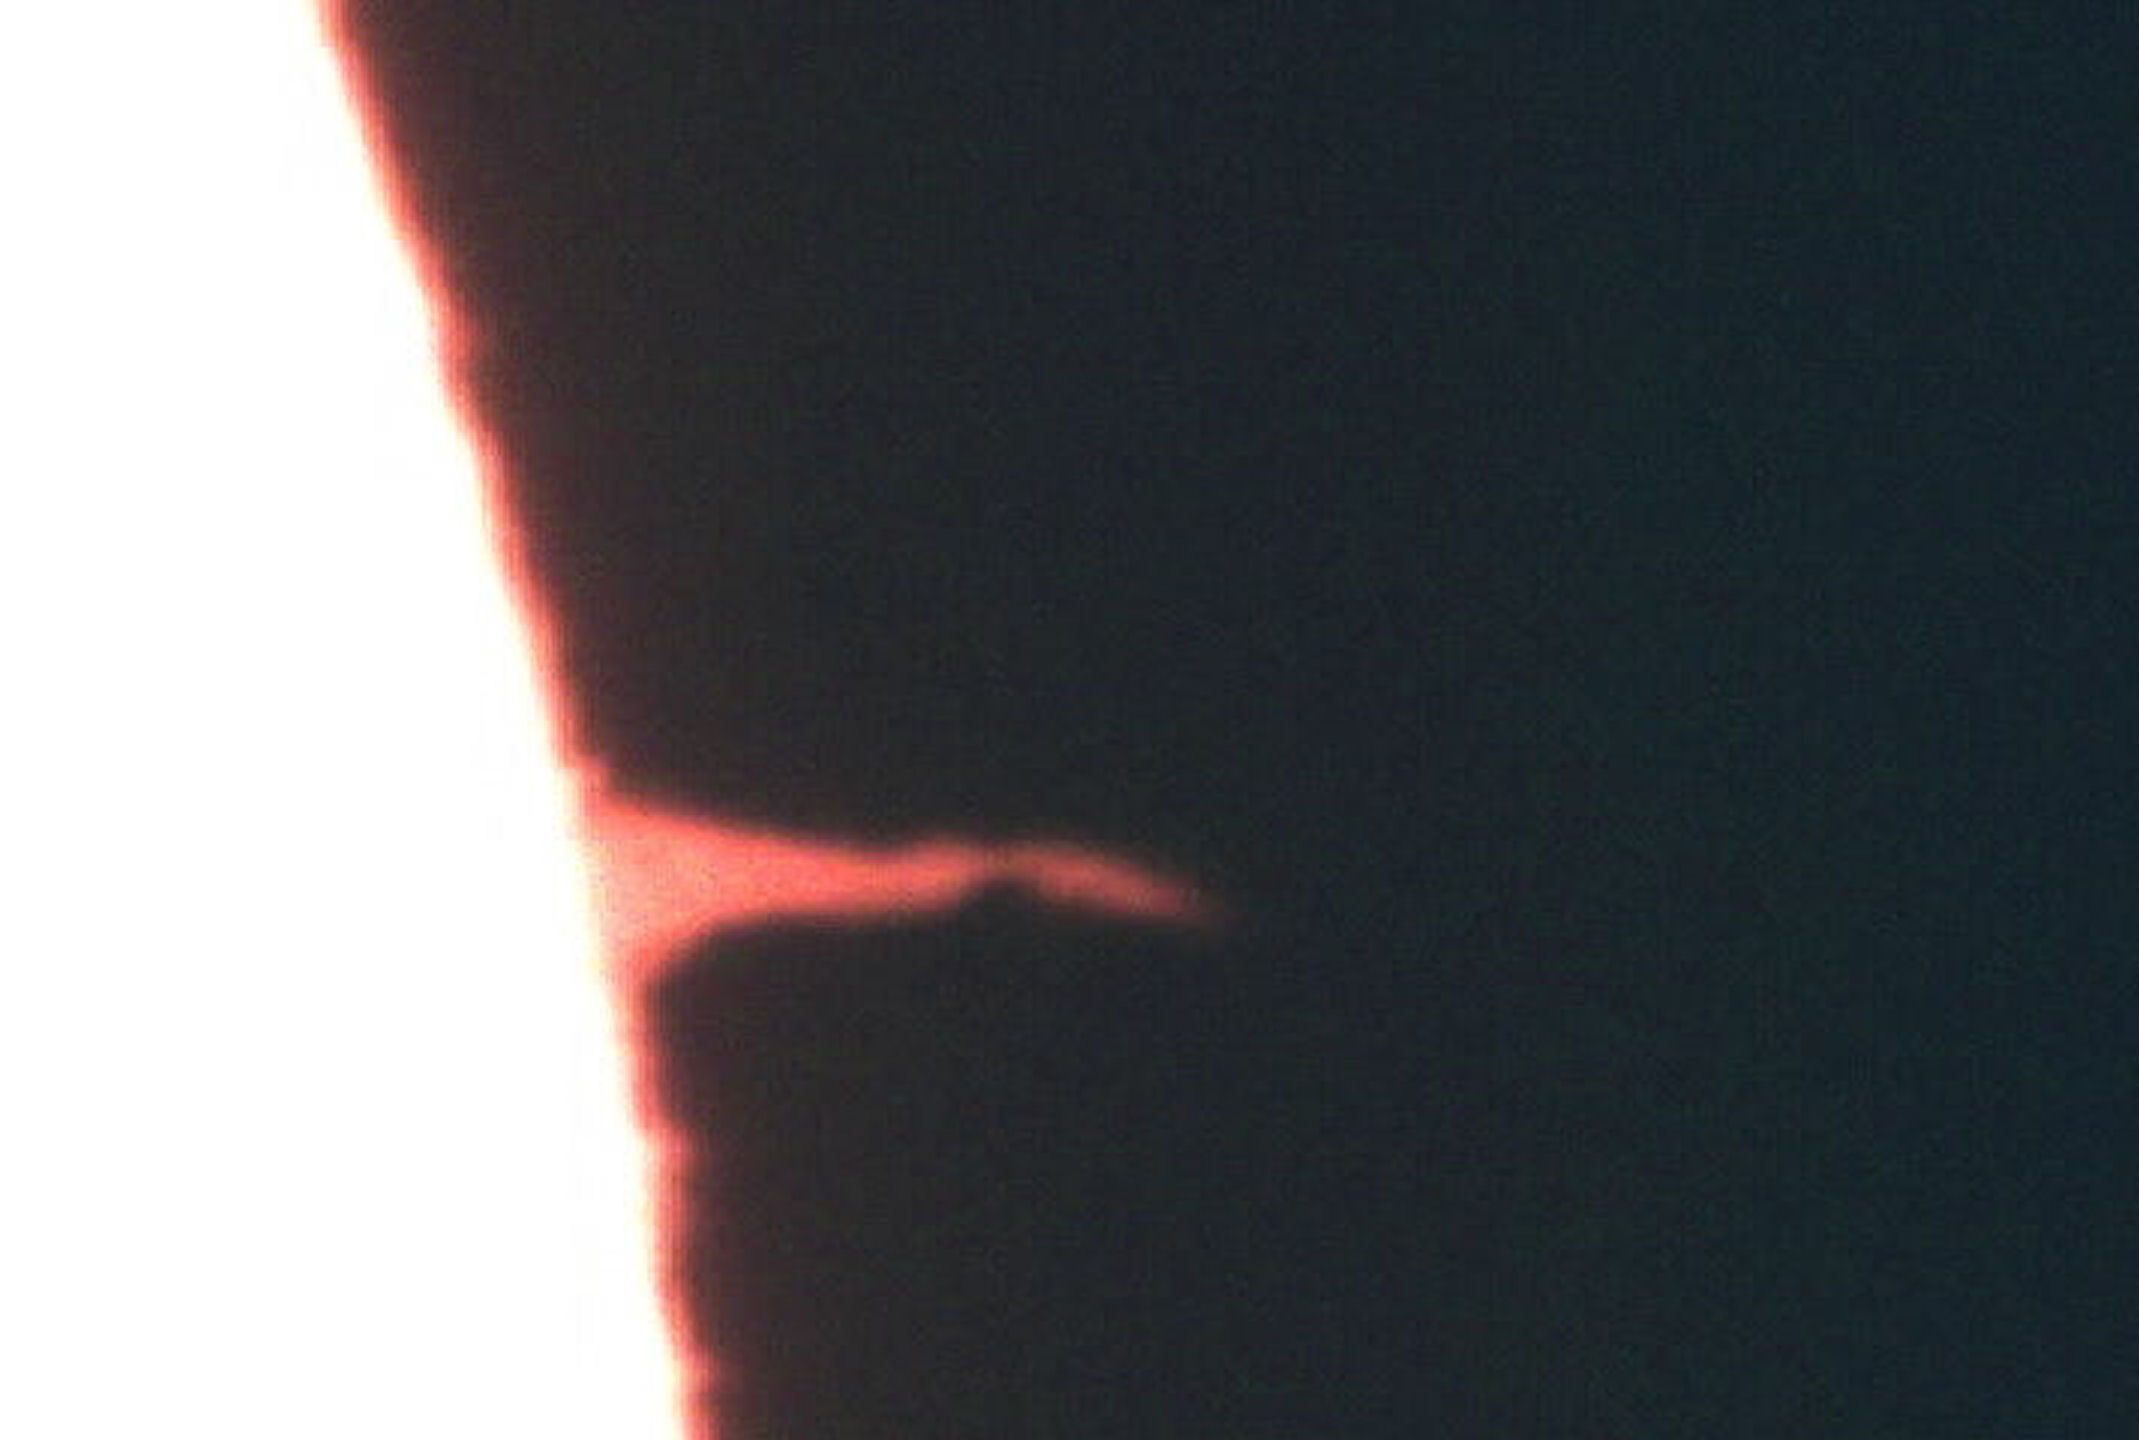 "Solar spike" by T Hayes. I believe this is the same "spike" as the one shown in monochrome on 17th August, but this picture from a video taken on Sunday 16th Aug. at 18.35 local time.